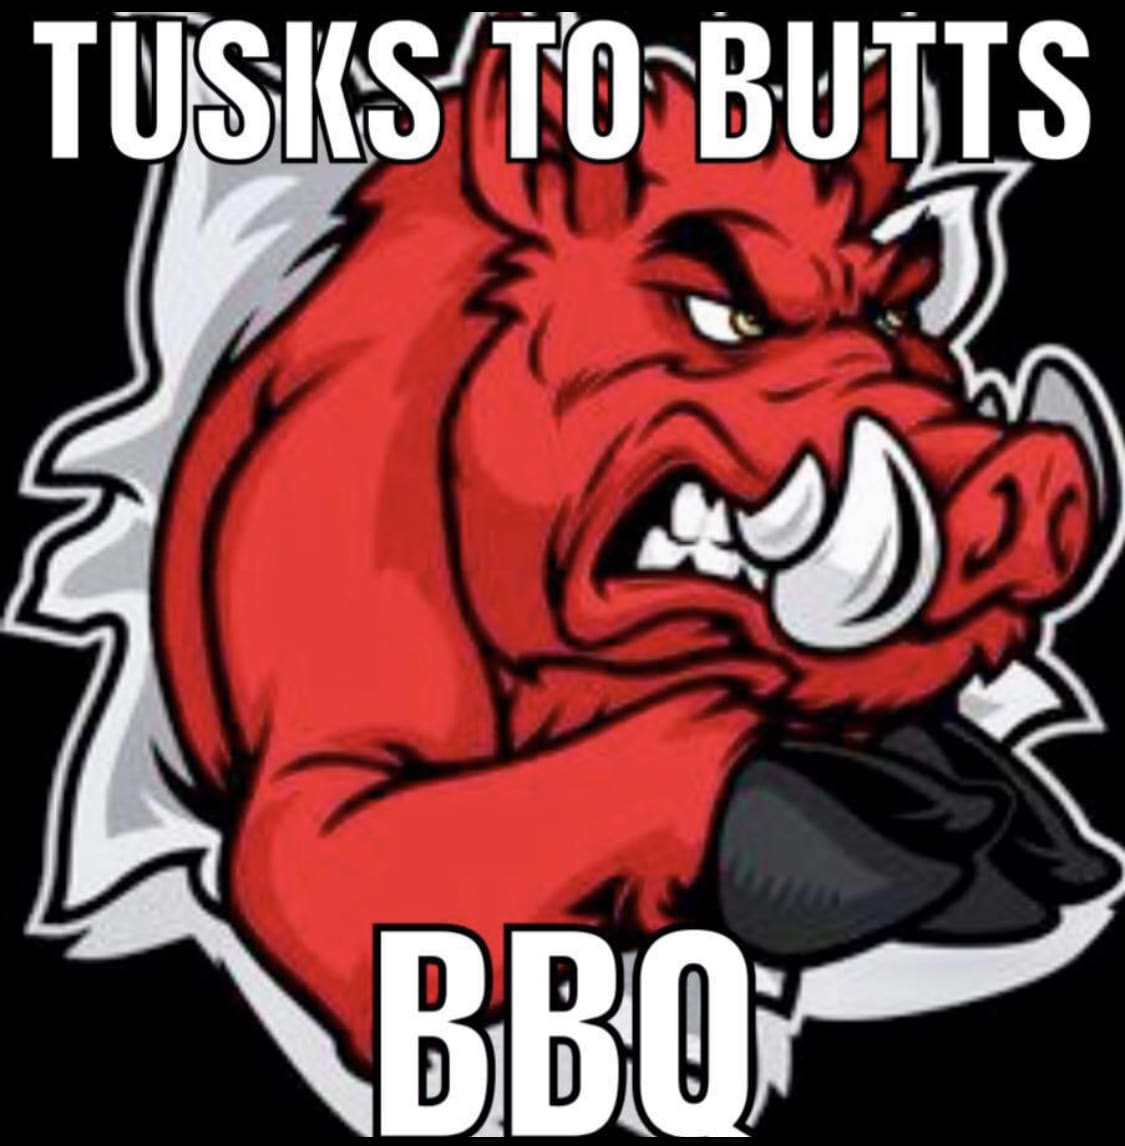 Tusks-To-Butts BBQ